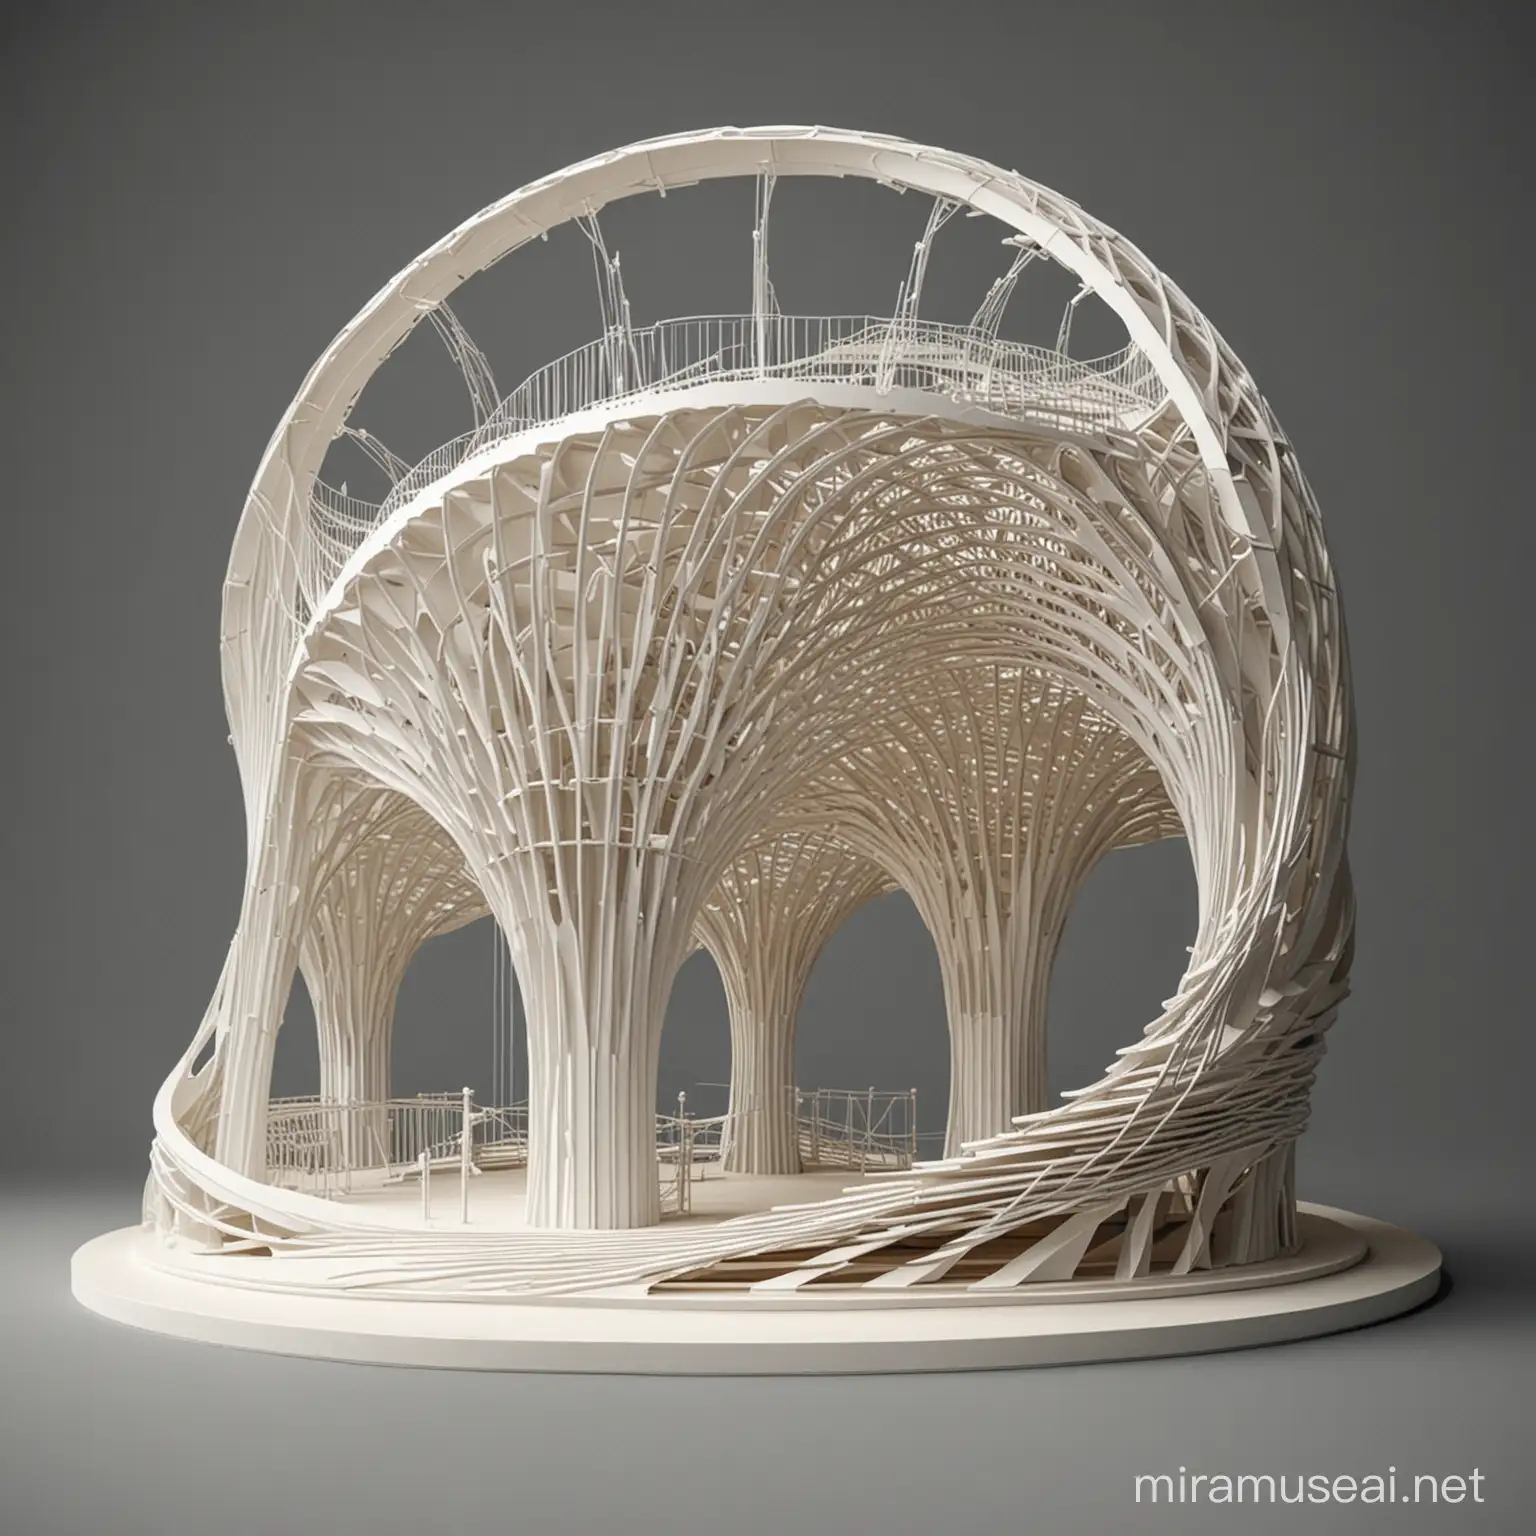 Curvaceous Architectural Pavilion Abstract Representation for Exhibition